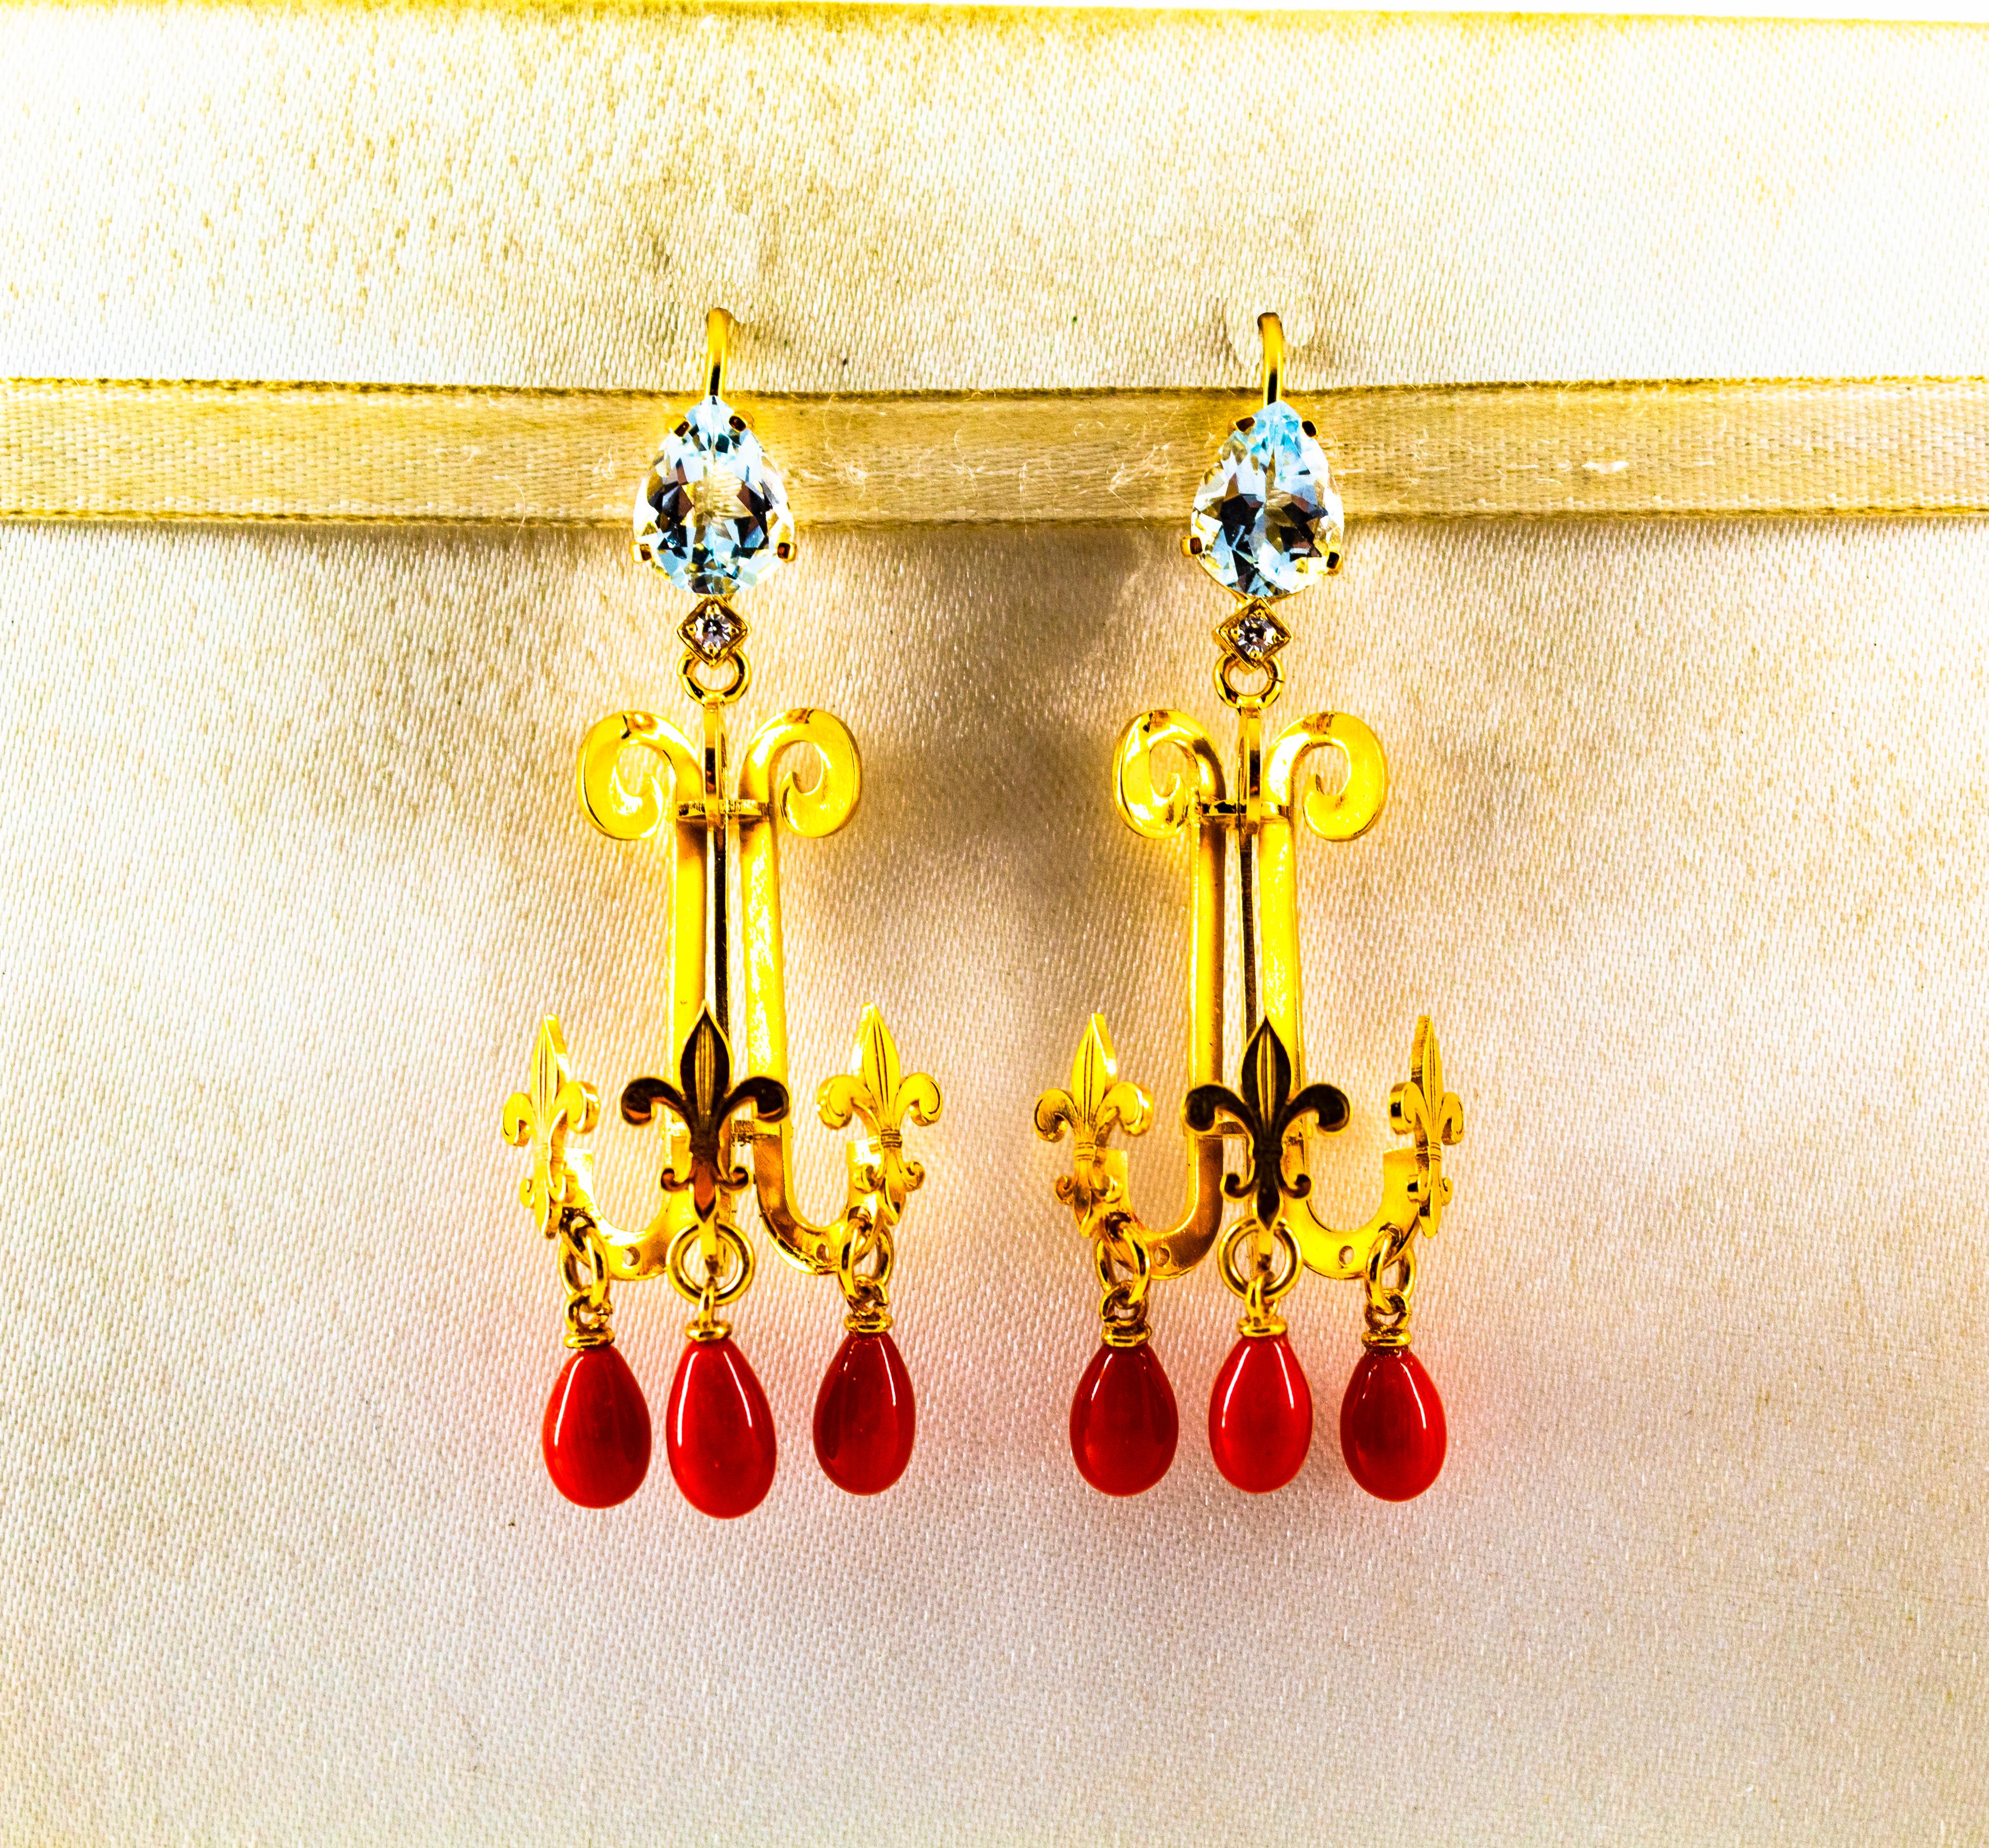 These Stud Earrings are made of 14K Yellow Gold.
These Earrings have 0.04 Carats of White Modern Round Cut Diamonds.
These Earrings have also 2.50 Carats of Aquamarines.
These Earrings have also Mediterranean (Sardinia, Italy) Red Coral.
All our